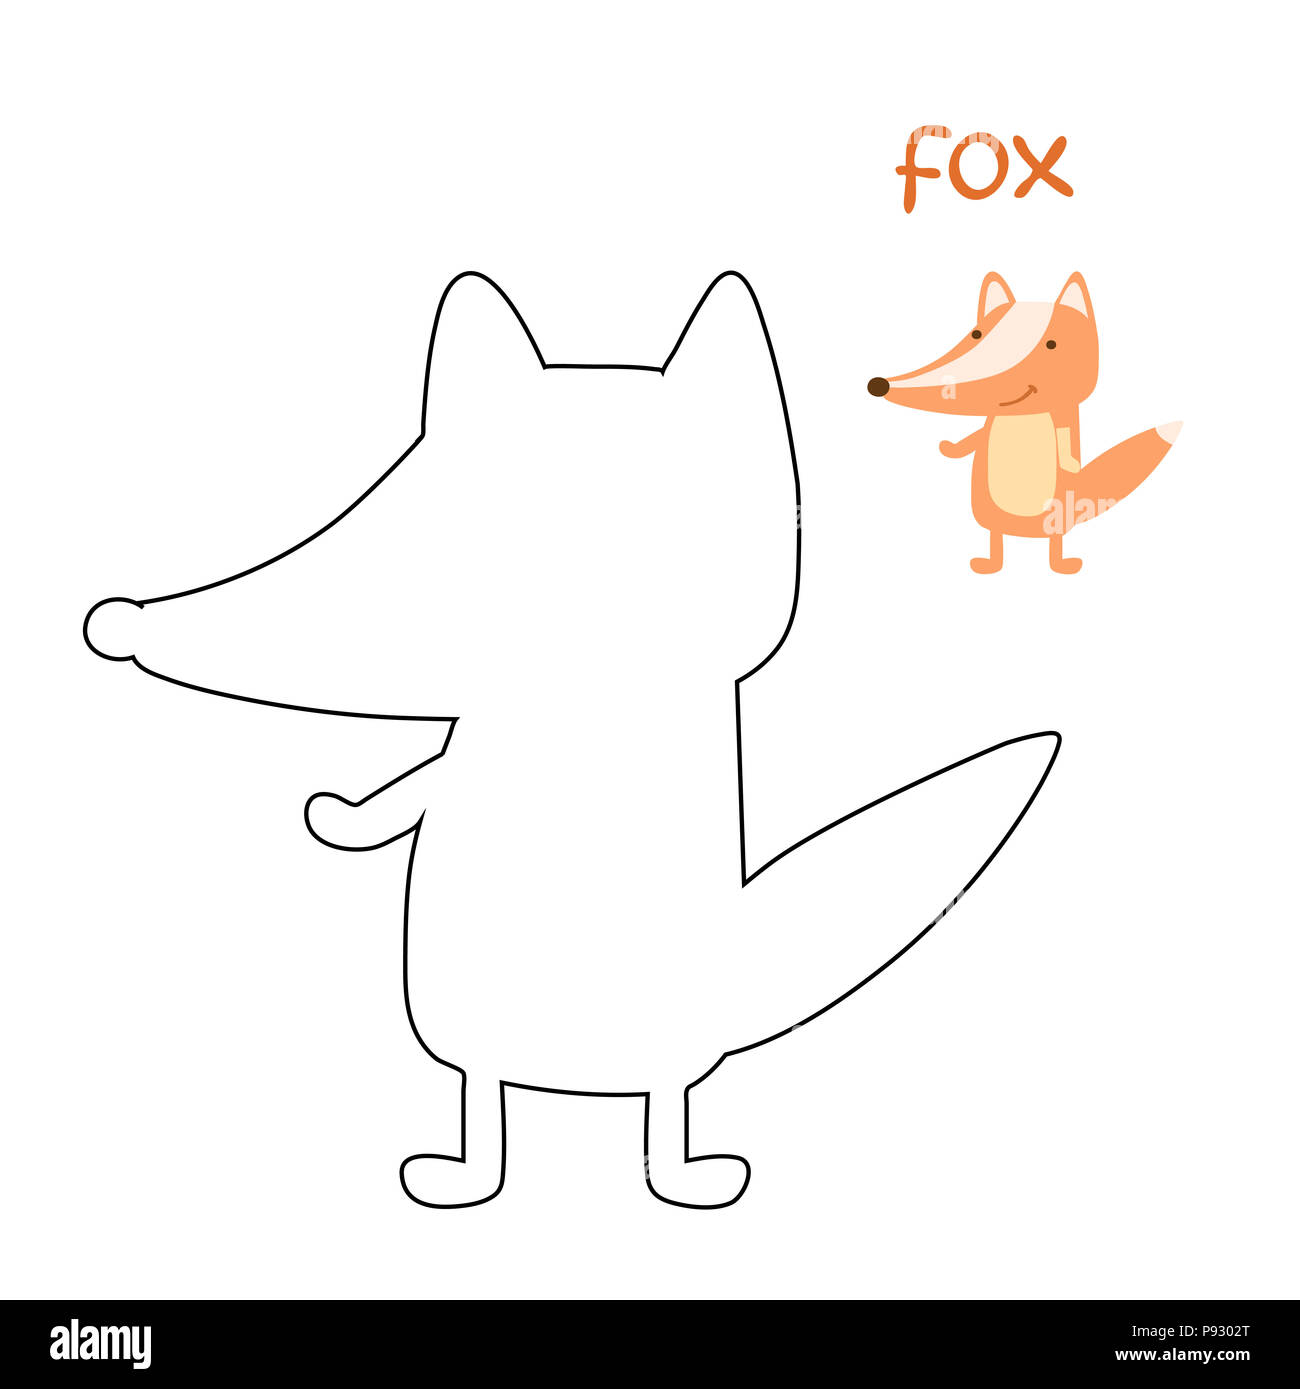 Coloring book for kids. Coloring page fox. illustration set Stock Photo